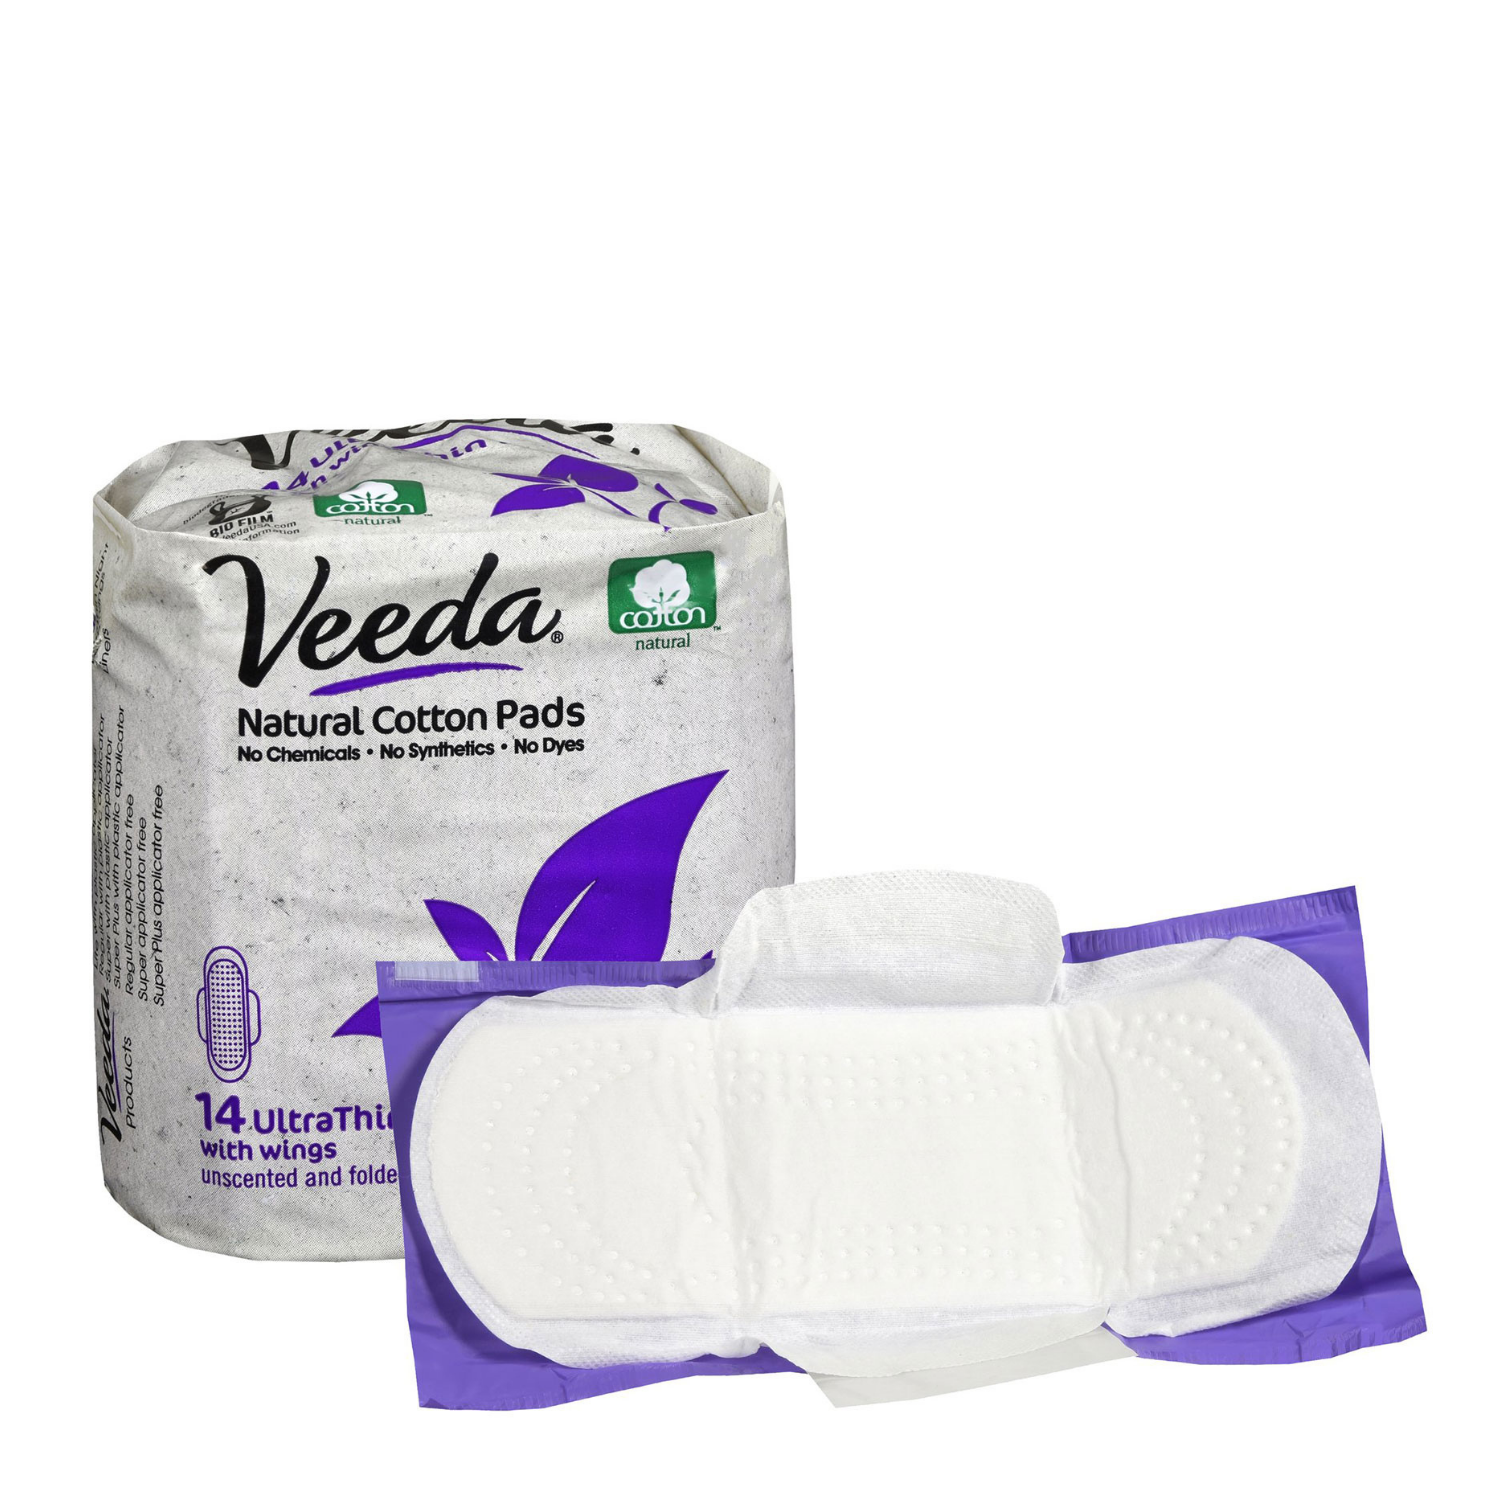 Veeda Natural Cotton Day Pads for Women, Hypoallergenic, Chlorine